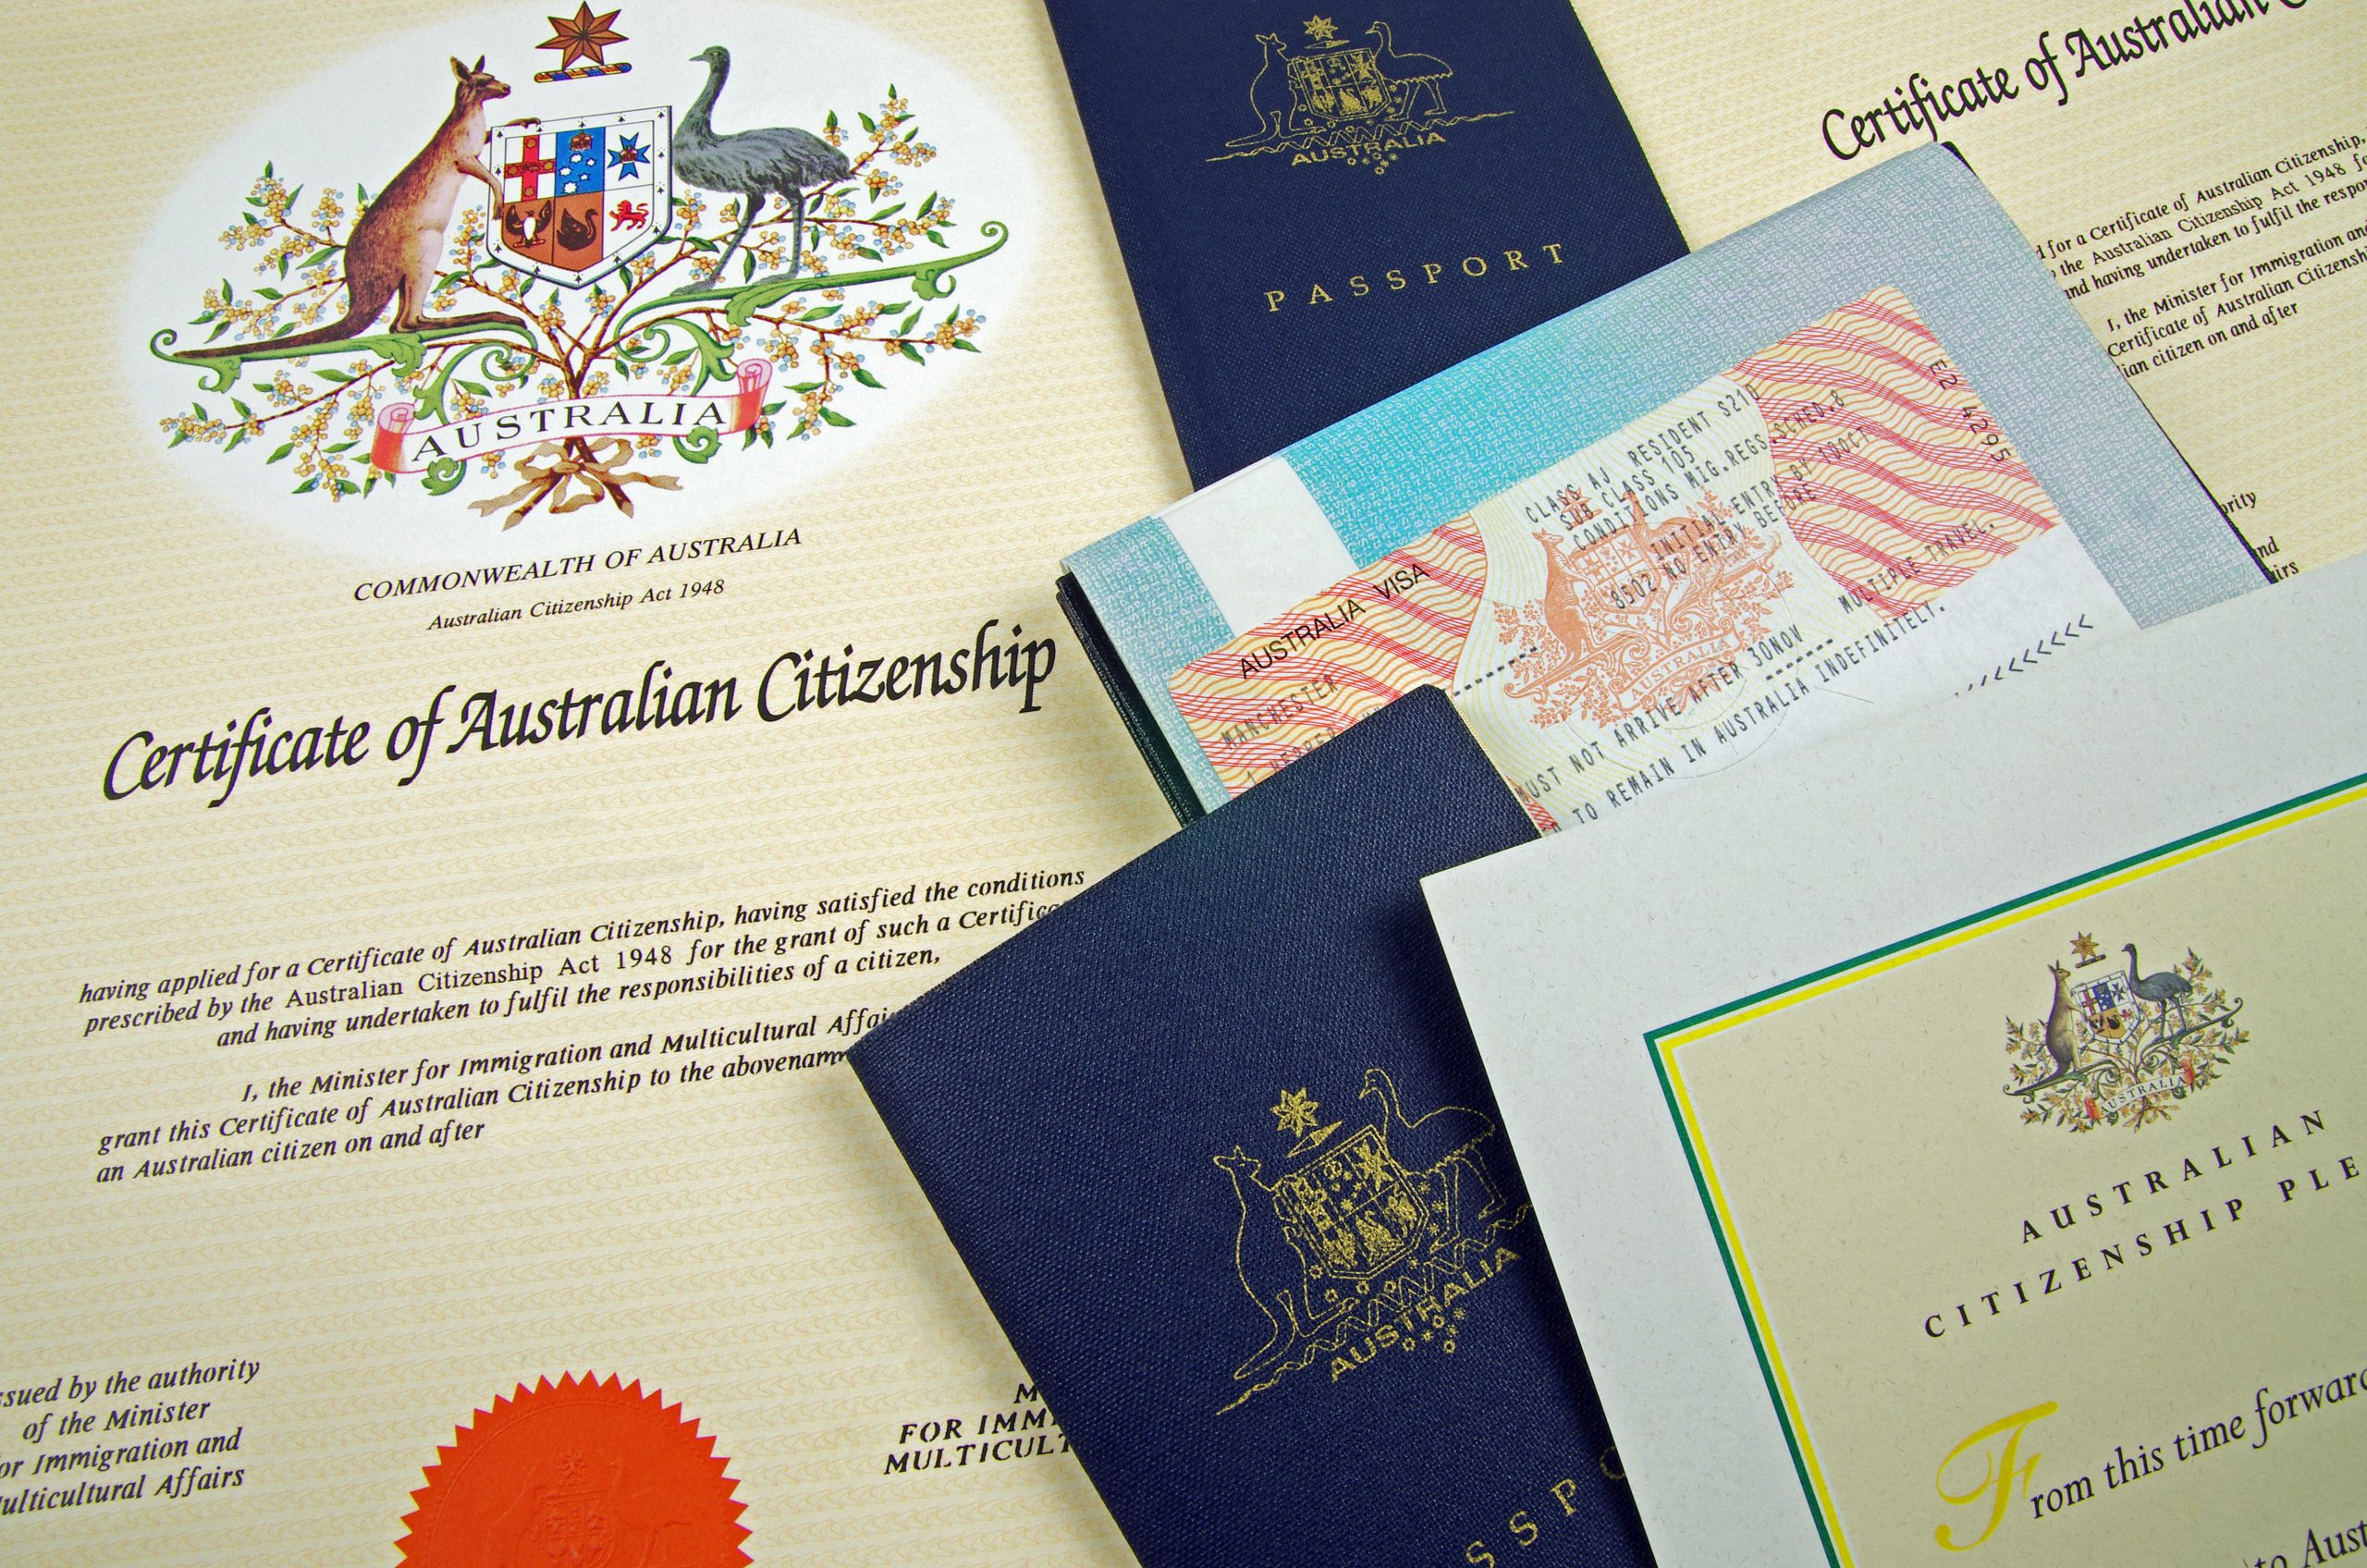 7 important Australian Immigration Updates from November 2020